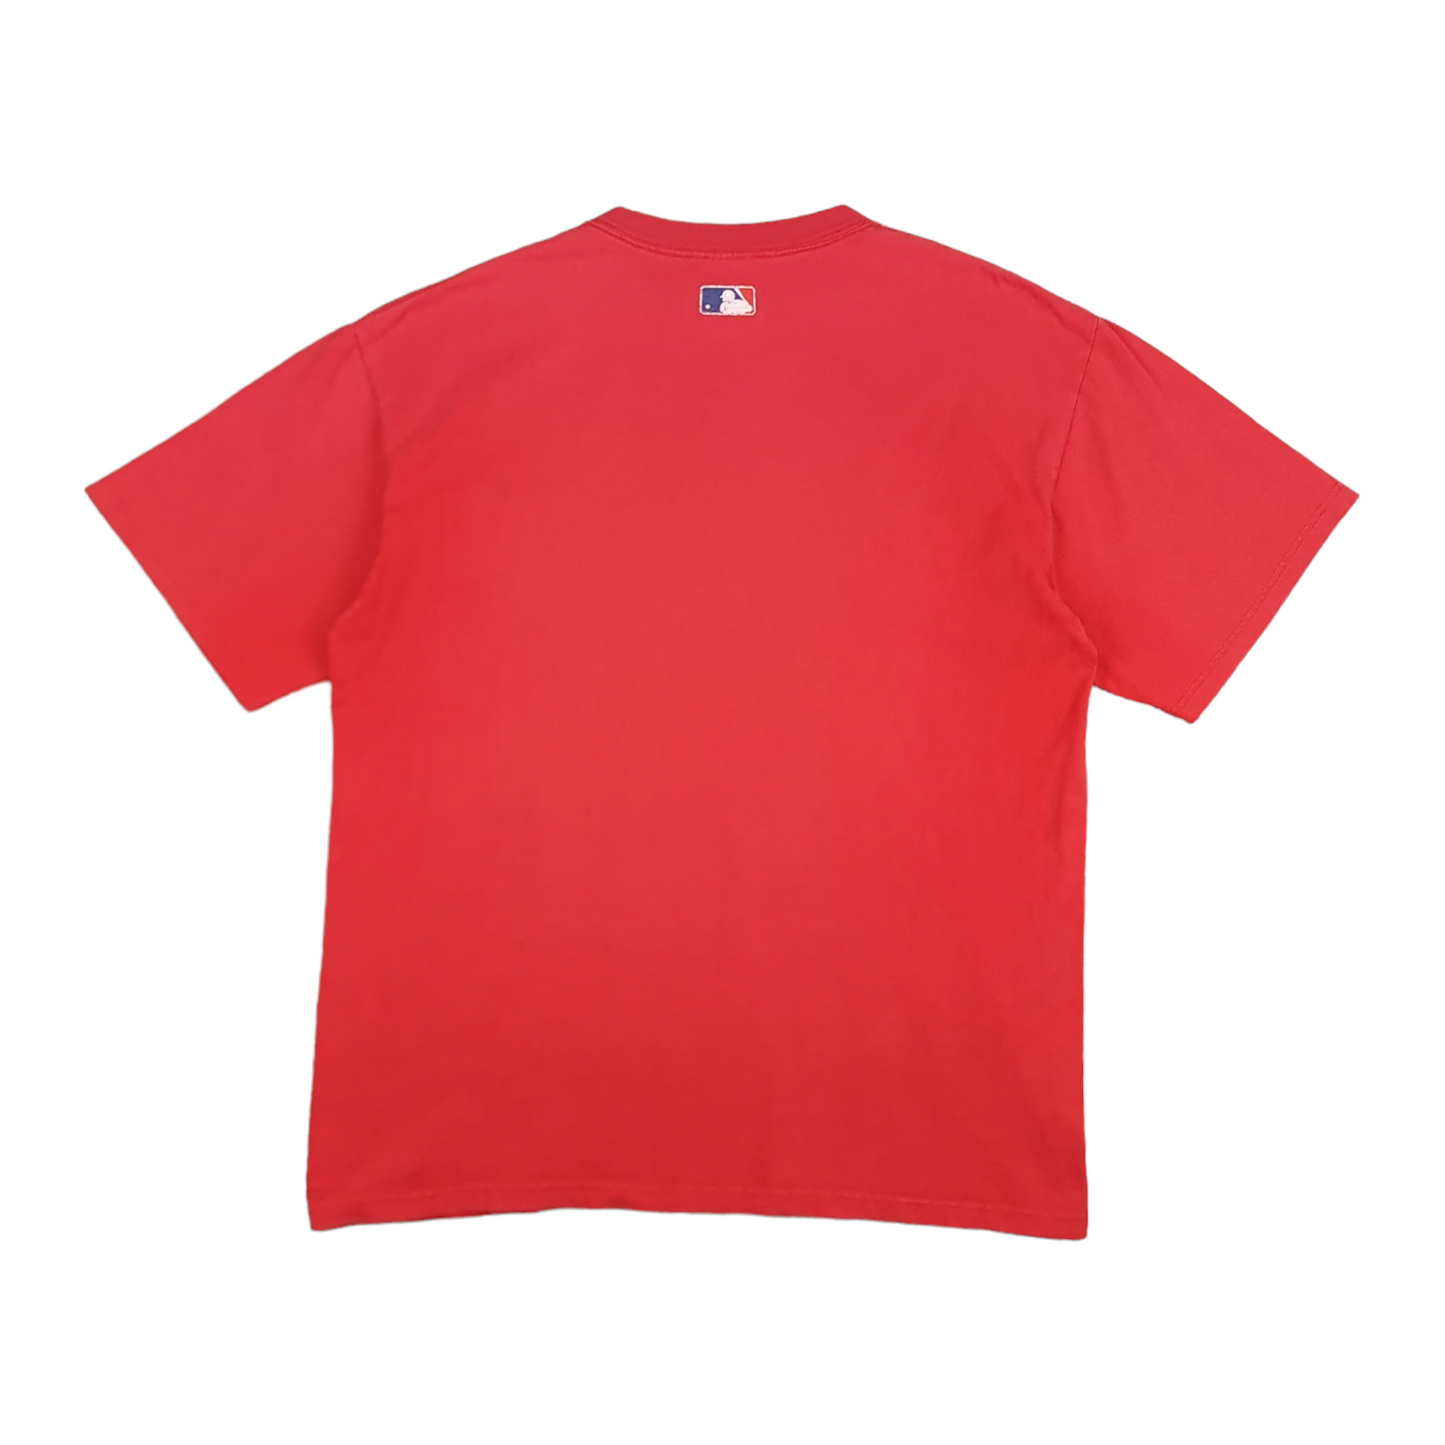 Vintage St Louis Cardinals Faded Tee - XL